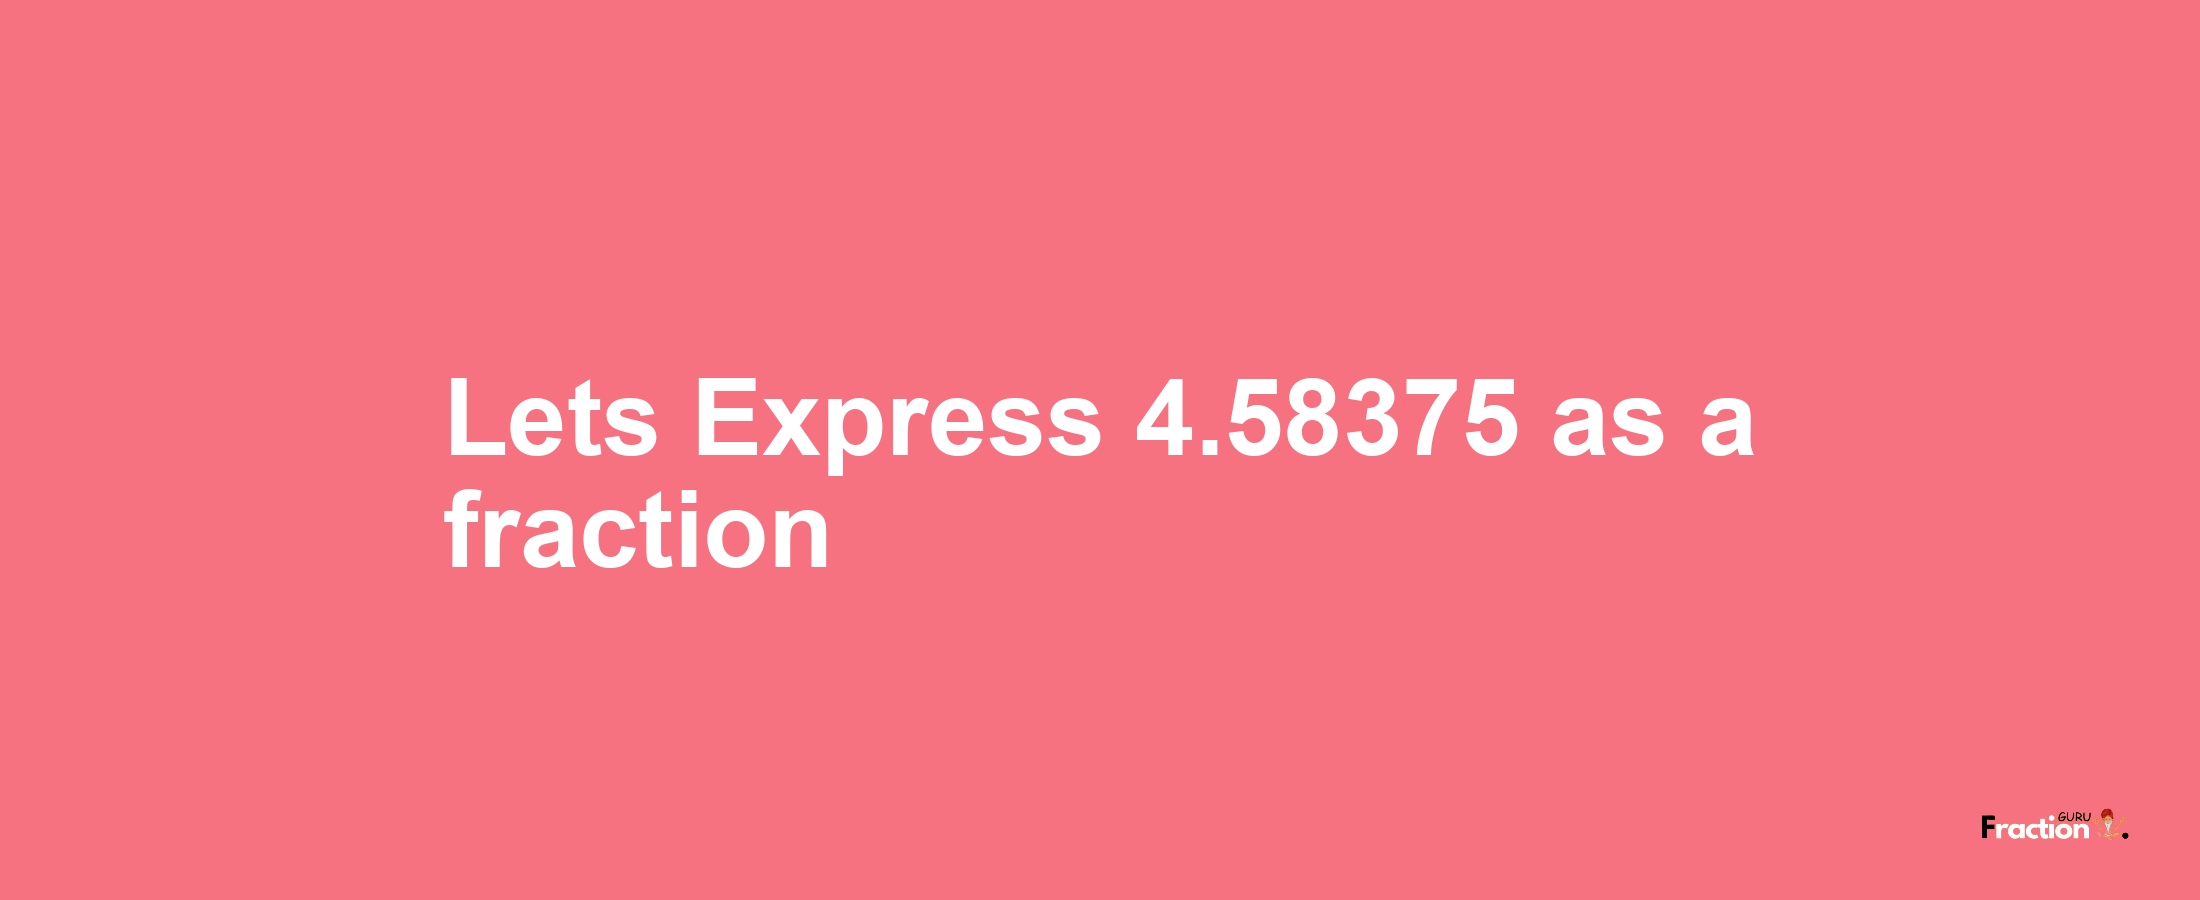 Lets Express 4.58375 as afraction